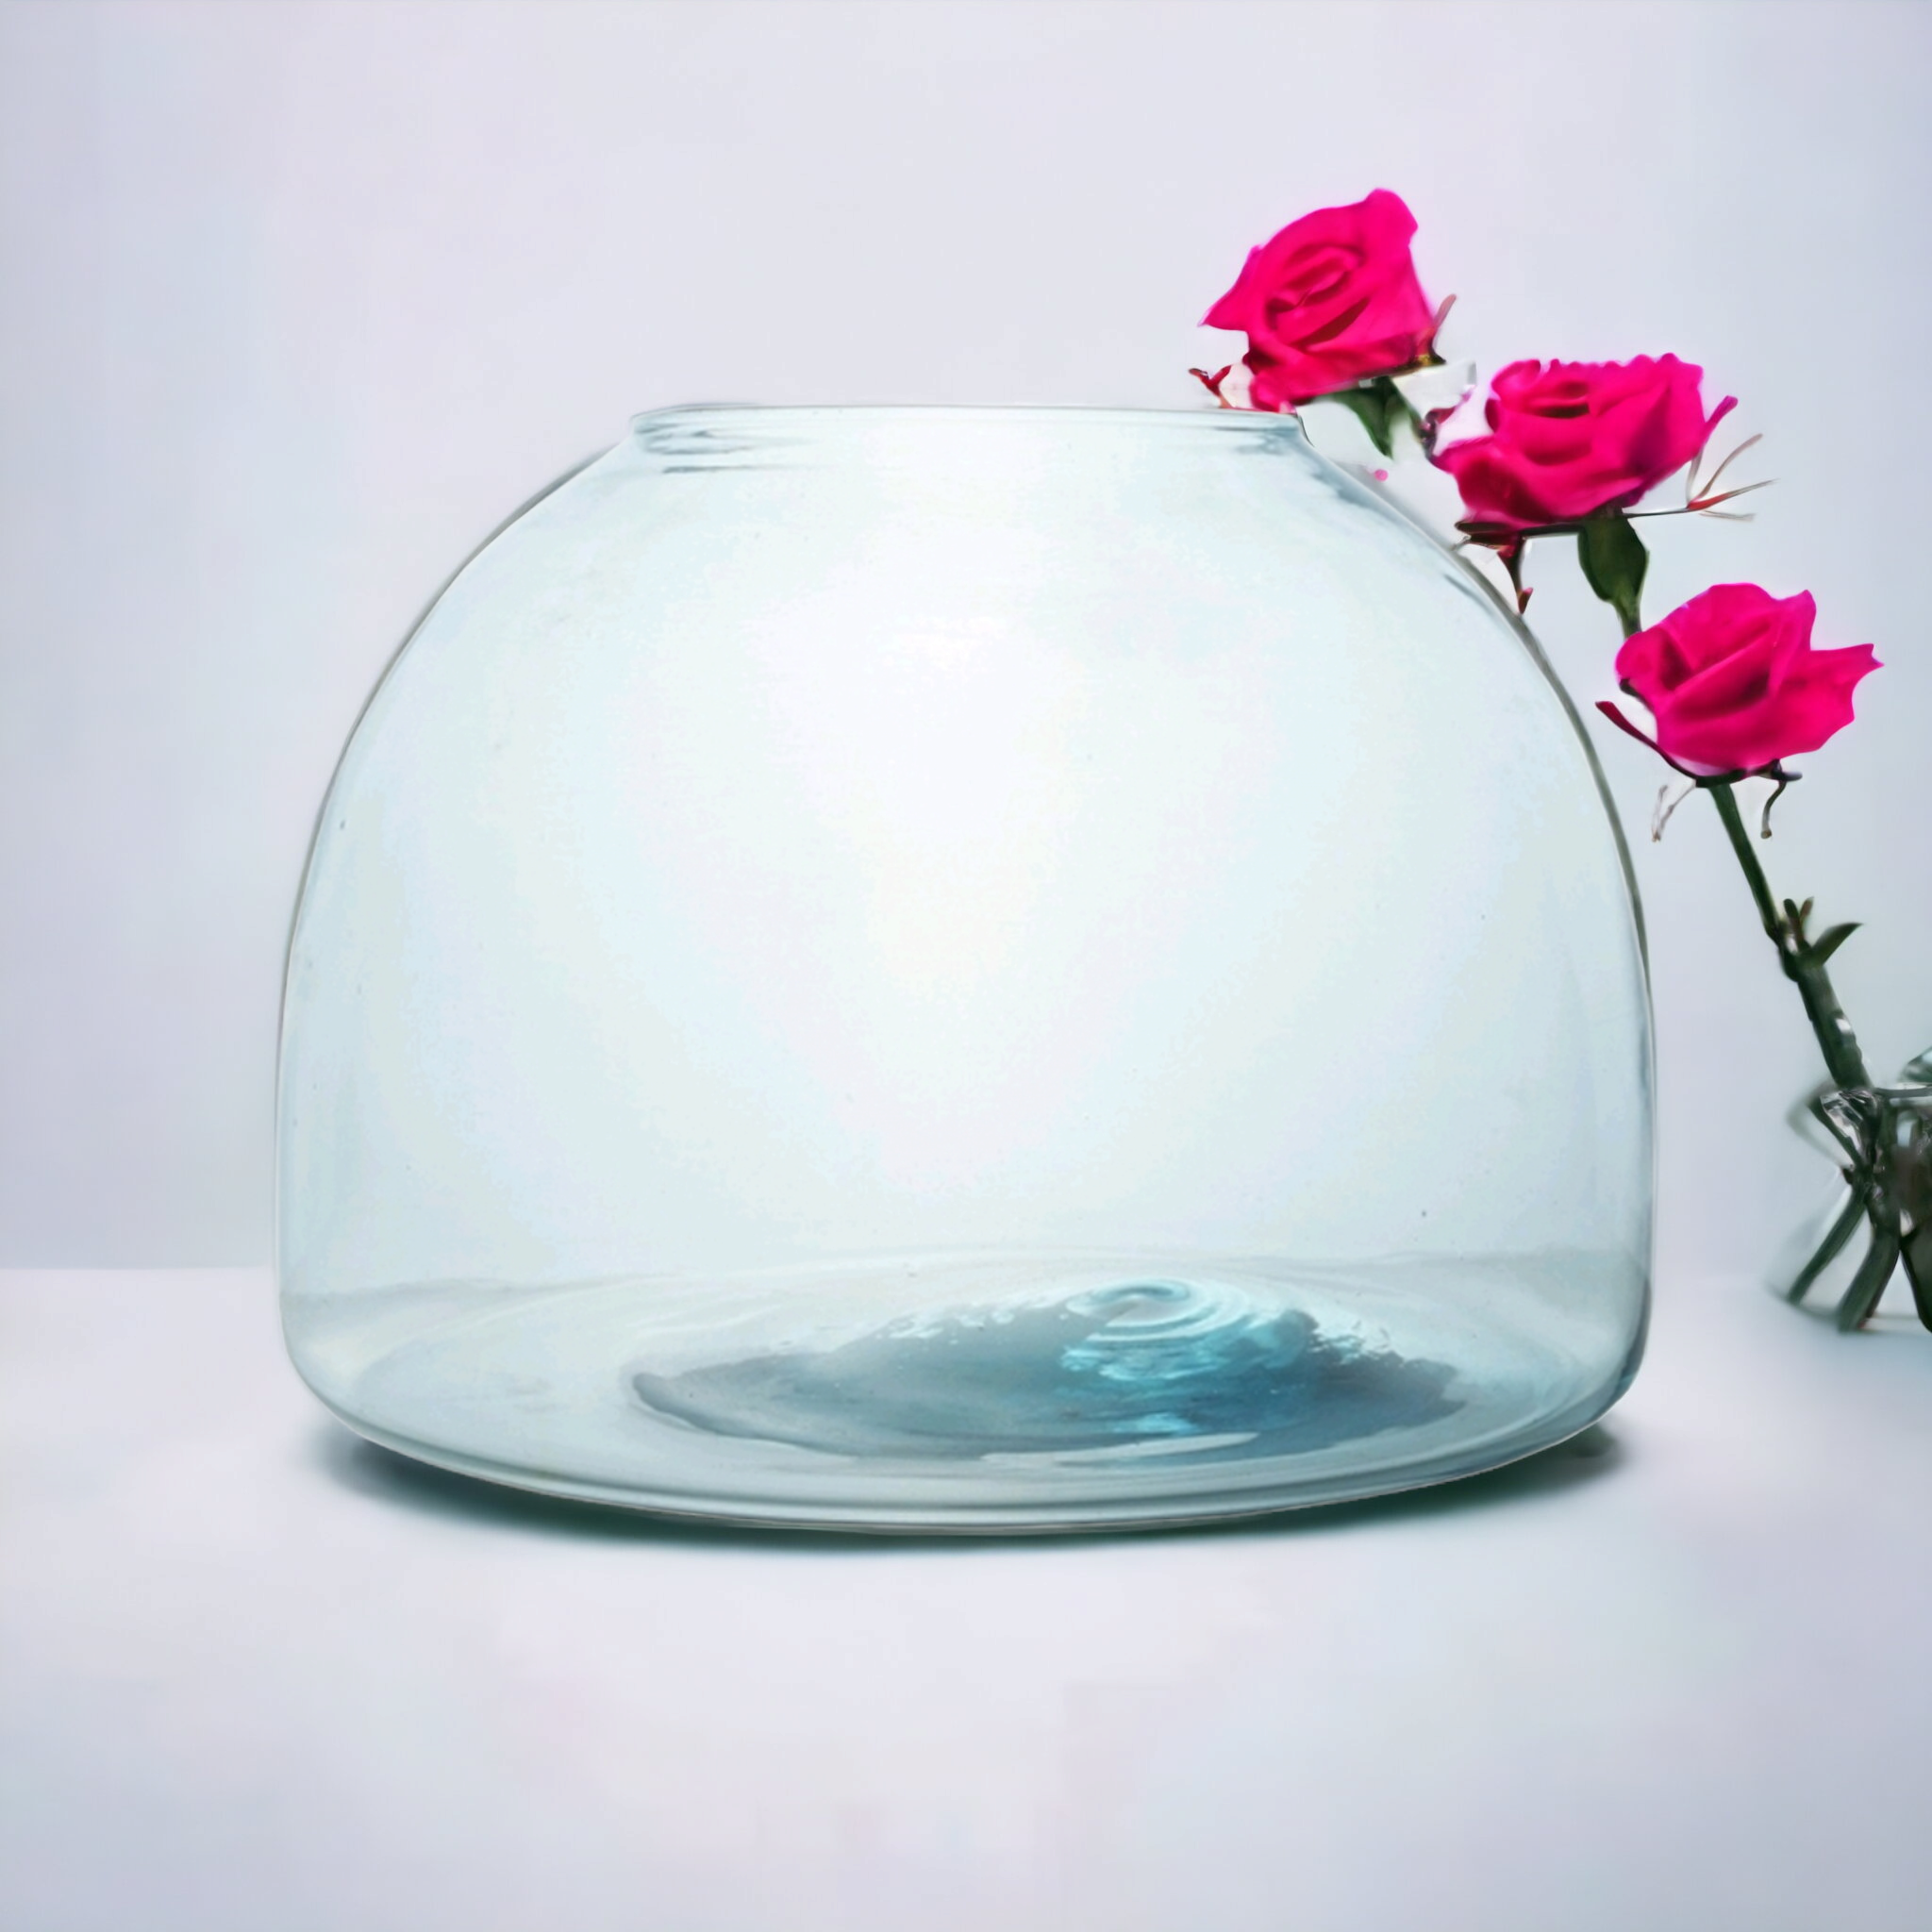 Pasabahce Glass Fish Bowl Flower Vase Recycle 220x160mm 21829